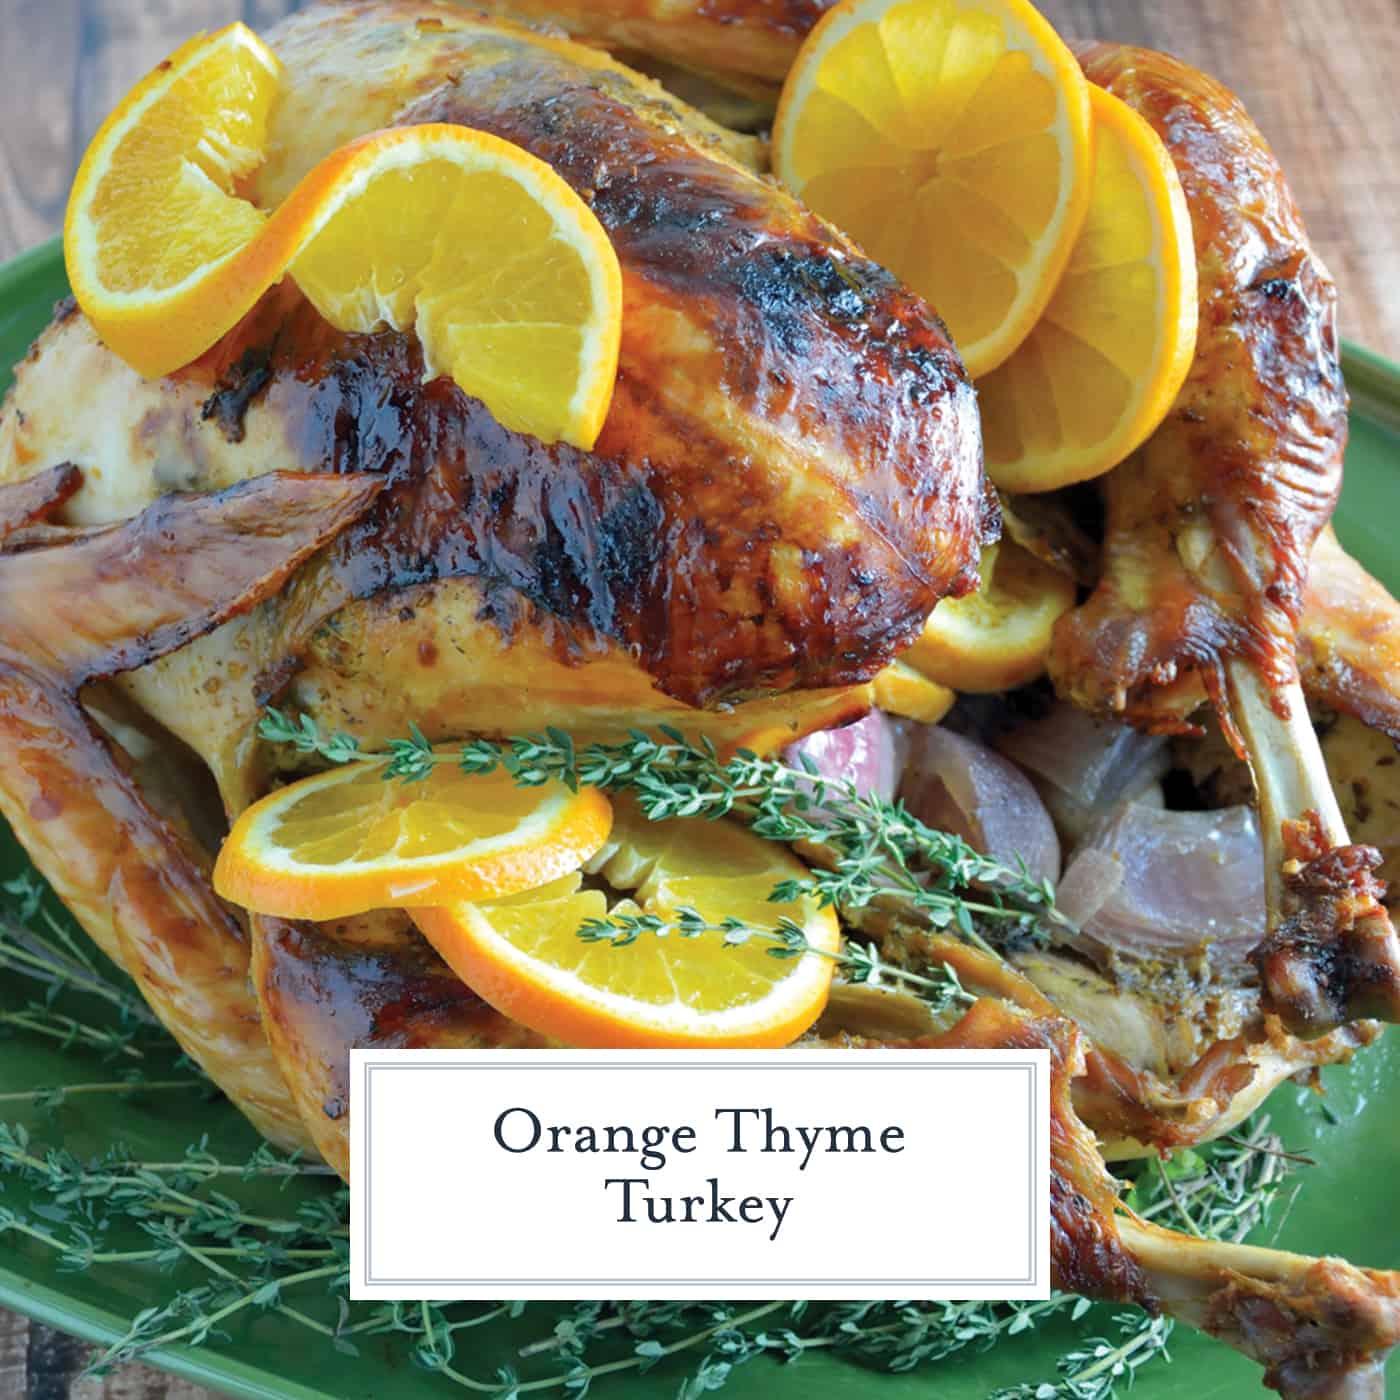 Orange Thyme Turkey is the BEST roasted turkey recipe for juicy turkey and guaranteed to give you the best drippings to make a flavorful gravy.  #roastturkey #thanksgiving www.savoryexperiments.com